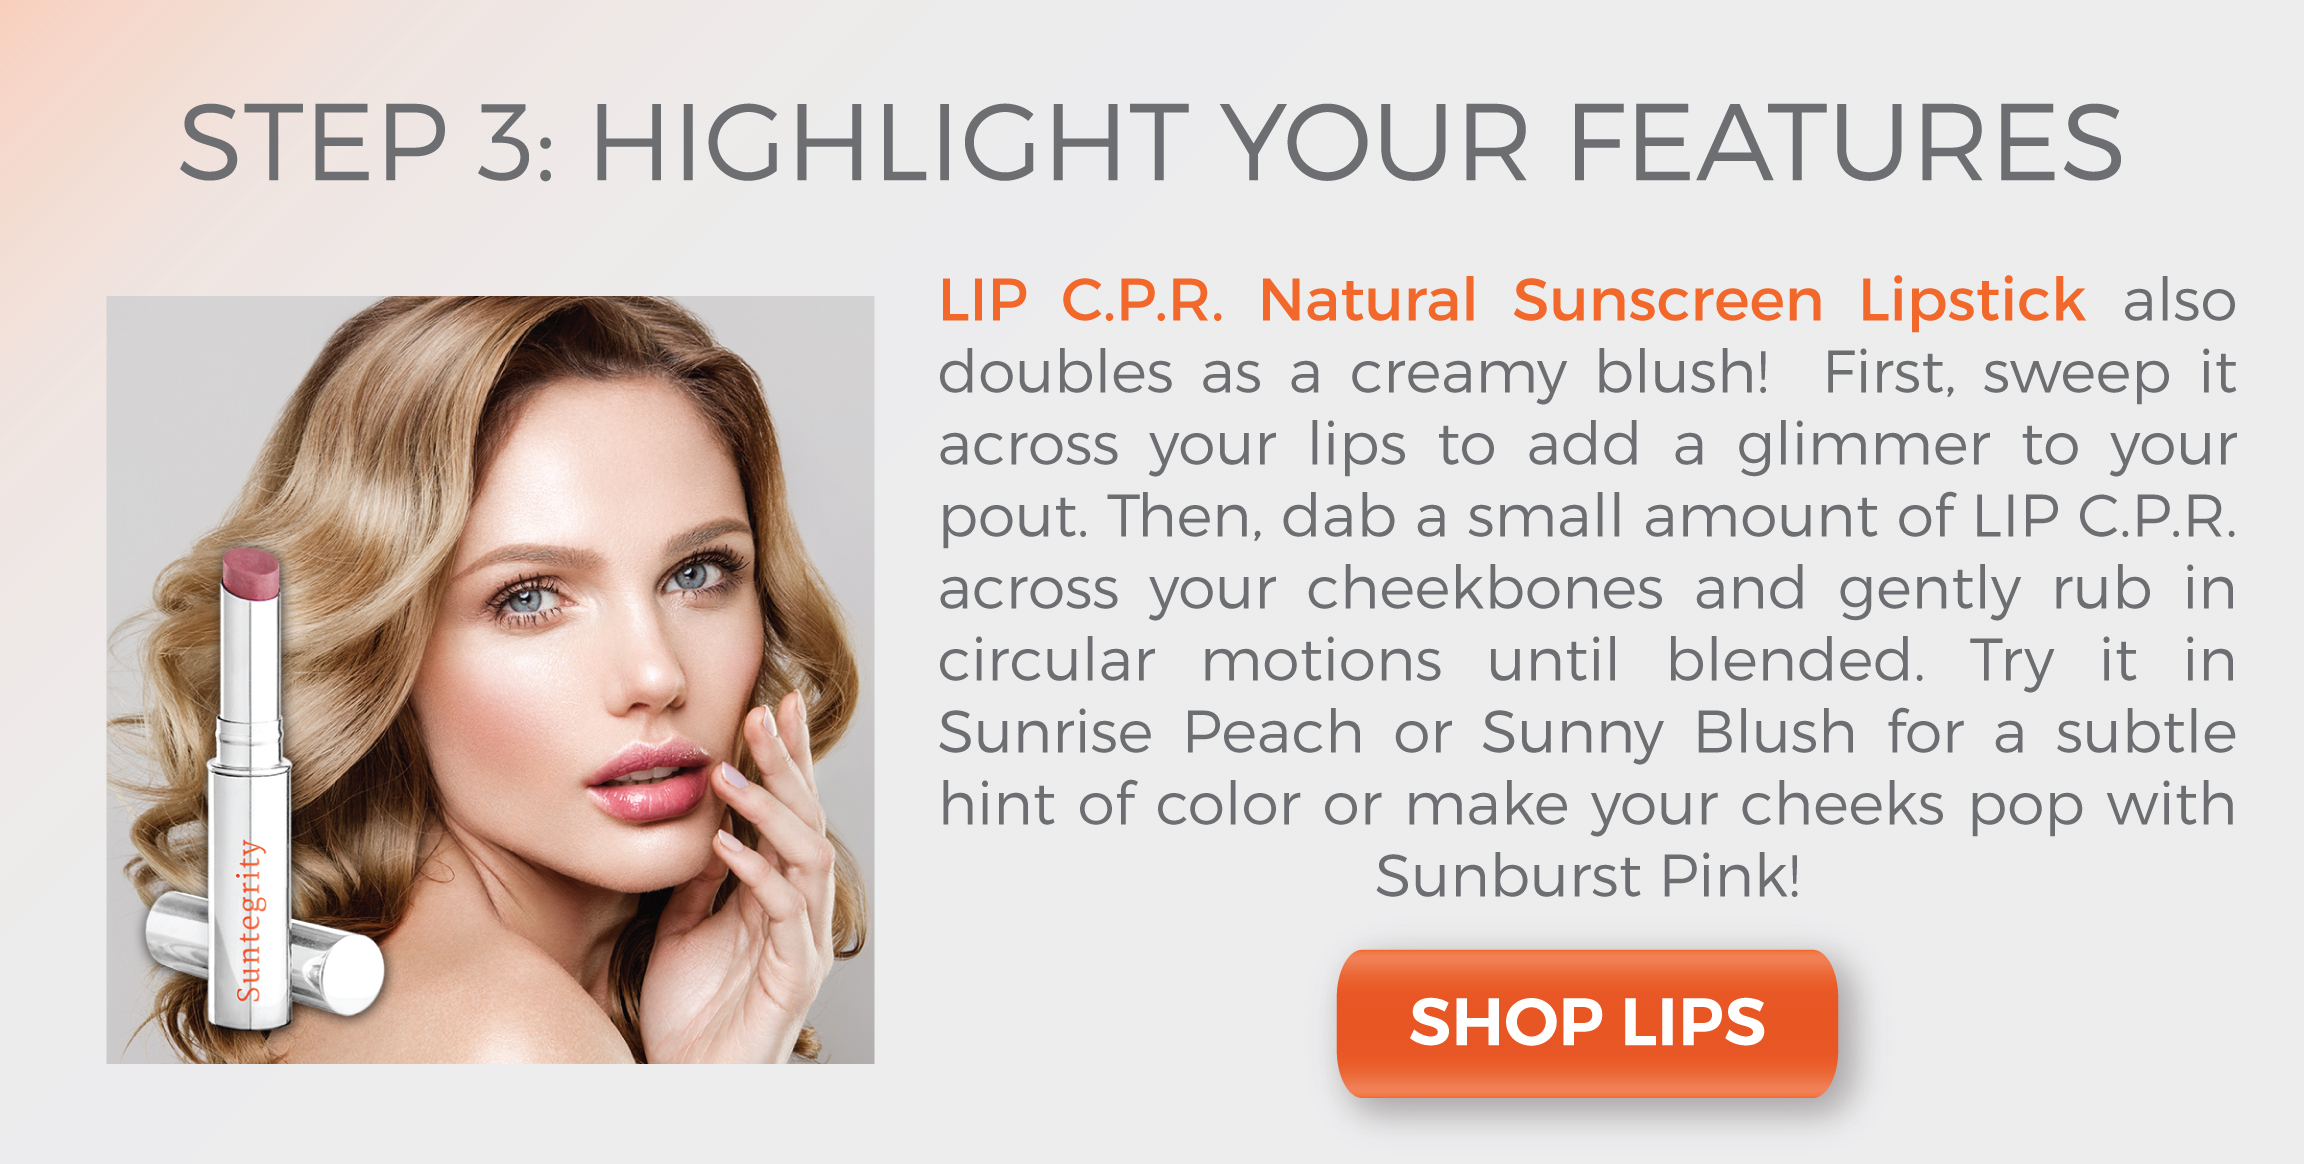 Blog - Fresh And Flawless Skin - Step 3 - Highlight Your Features - Suntegrity Skincare